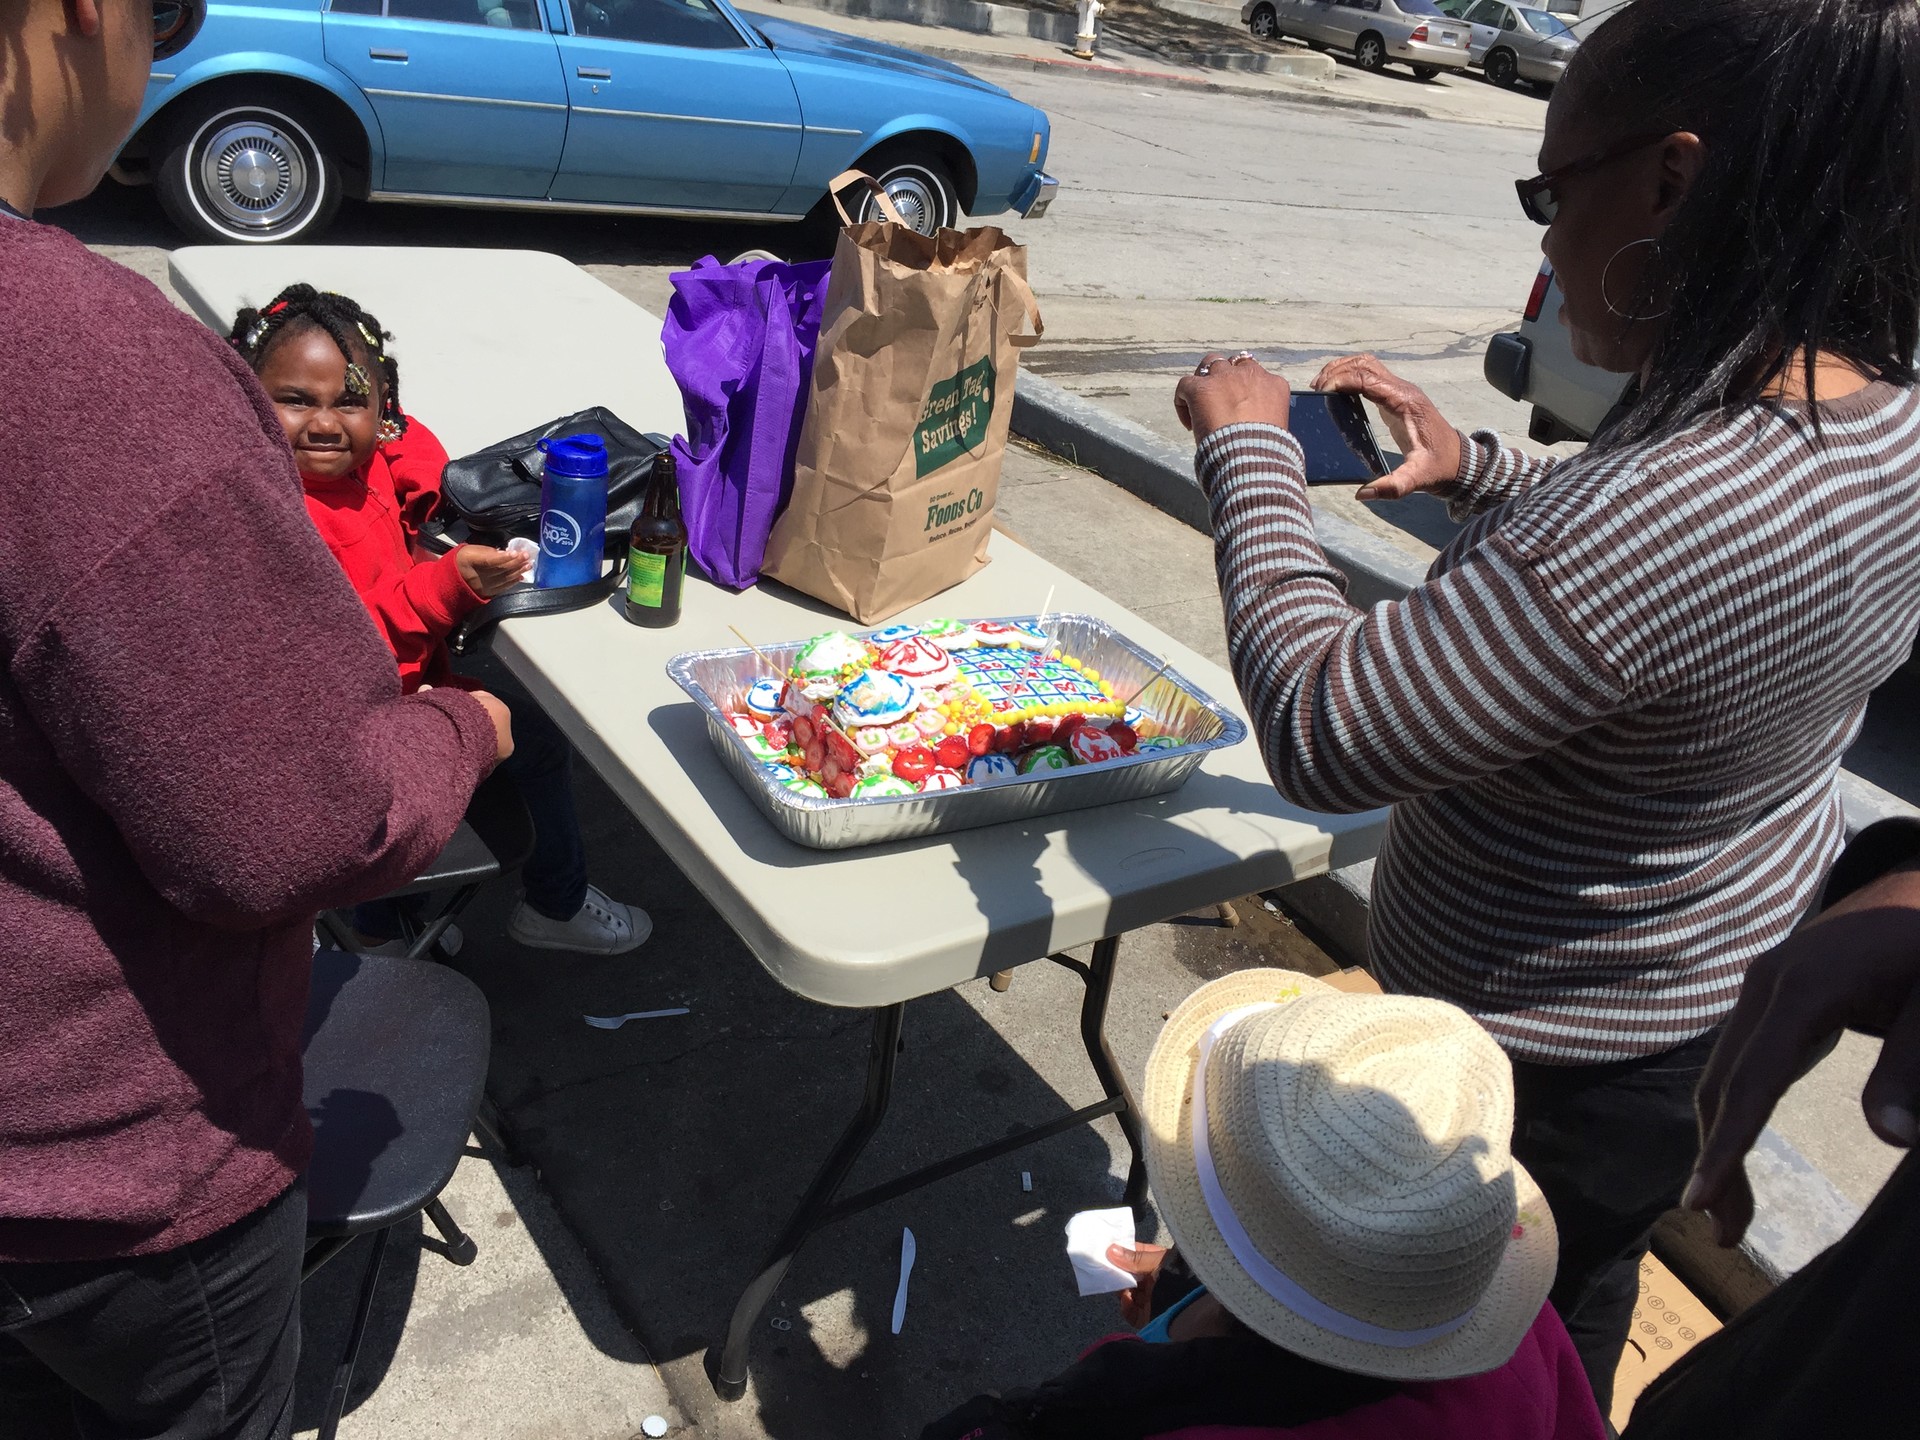 Residents admire a 'Bingo'-themed birthday cake on display at a July 26 barbecue in Potrero Terrace.